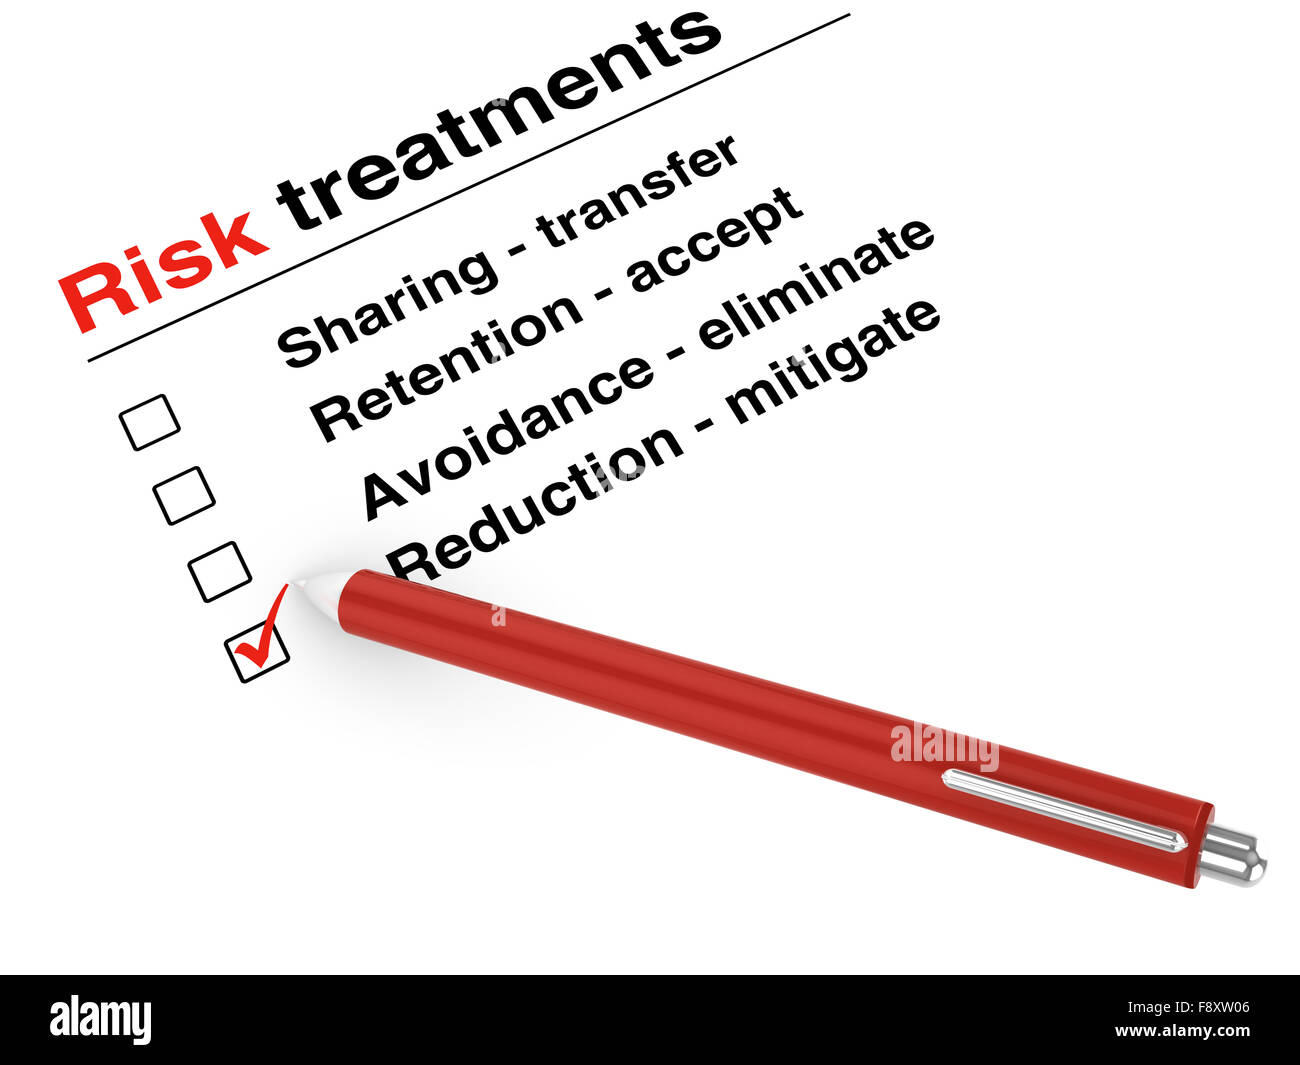 Risk treatment checklist and a pen on white background Stock Photo